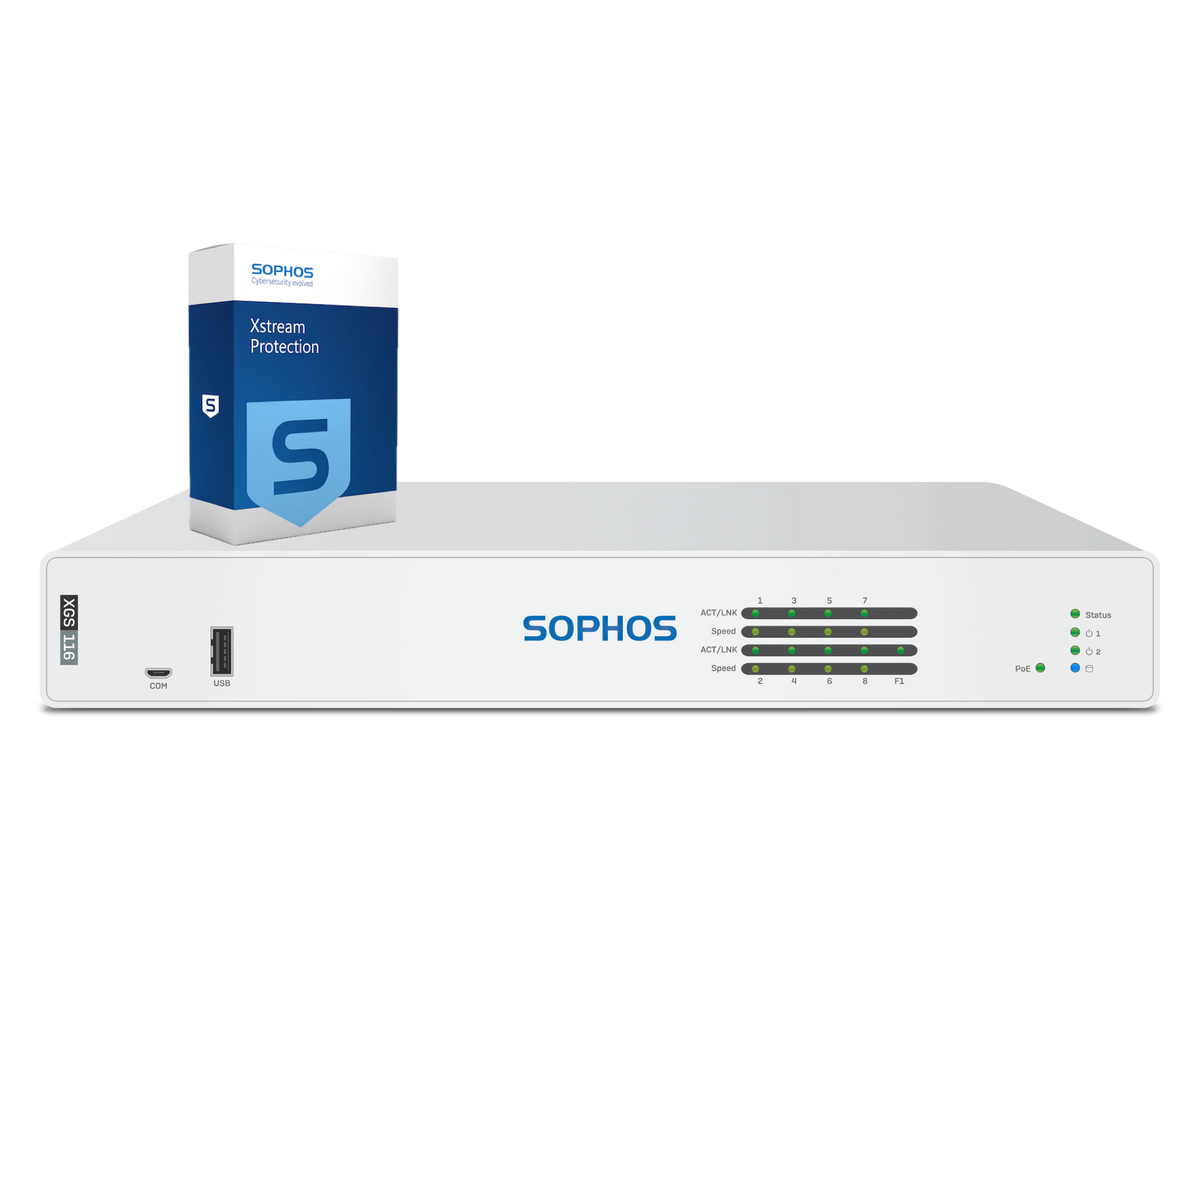 Sophos XGS 116 Firewall with Xstream Protection, 3-year - UK power cord